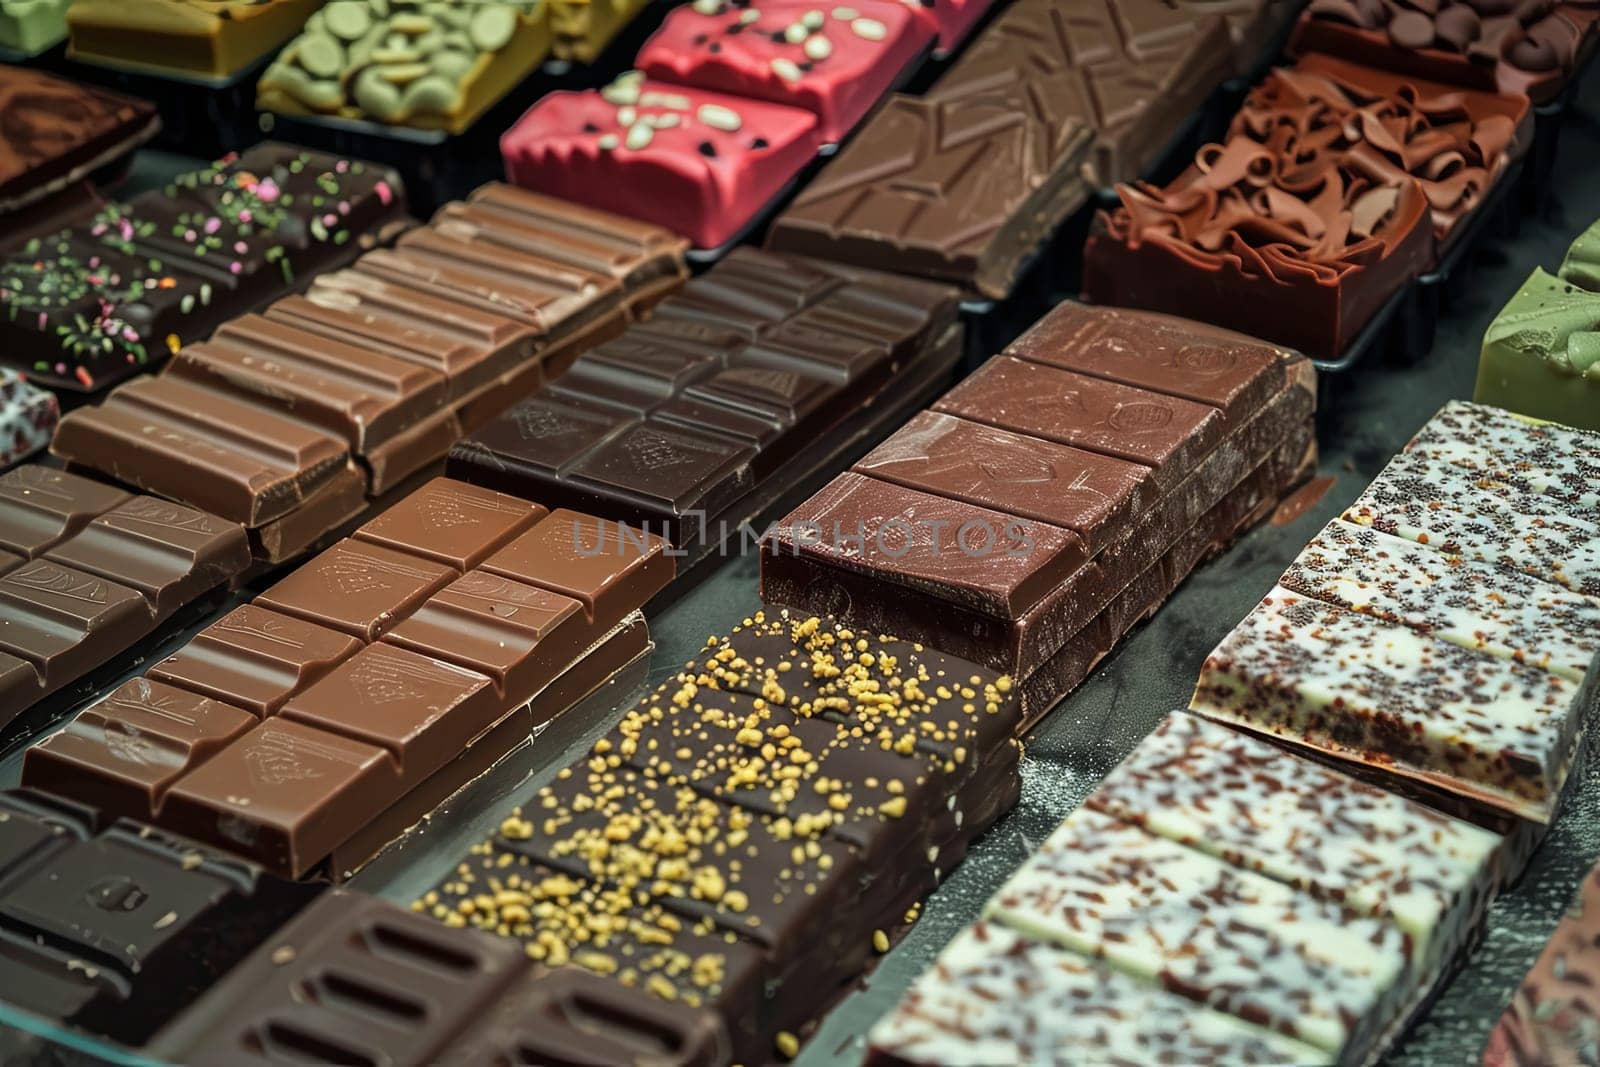 A display case filled with various types of chocolate bars in rich colors and flavors.